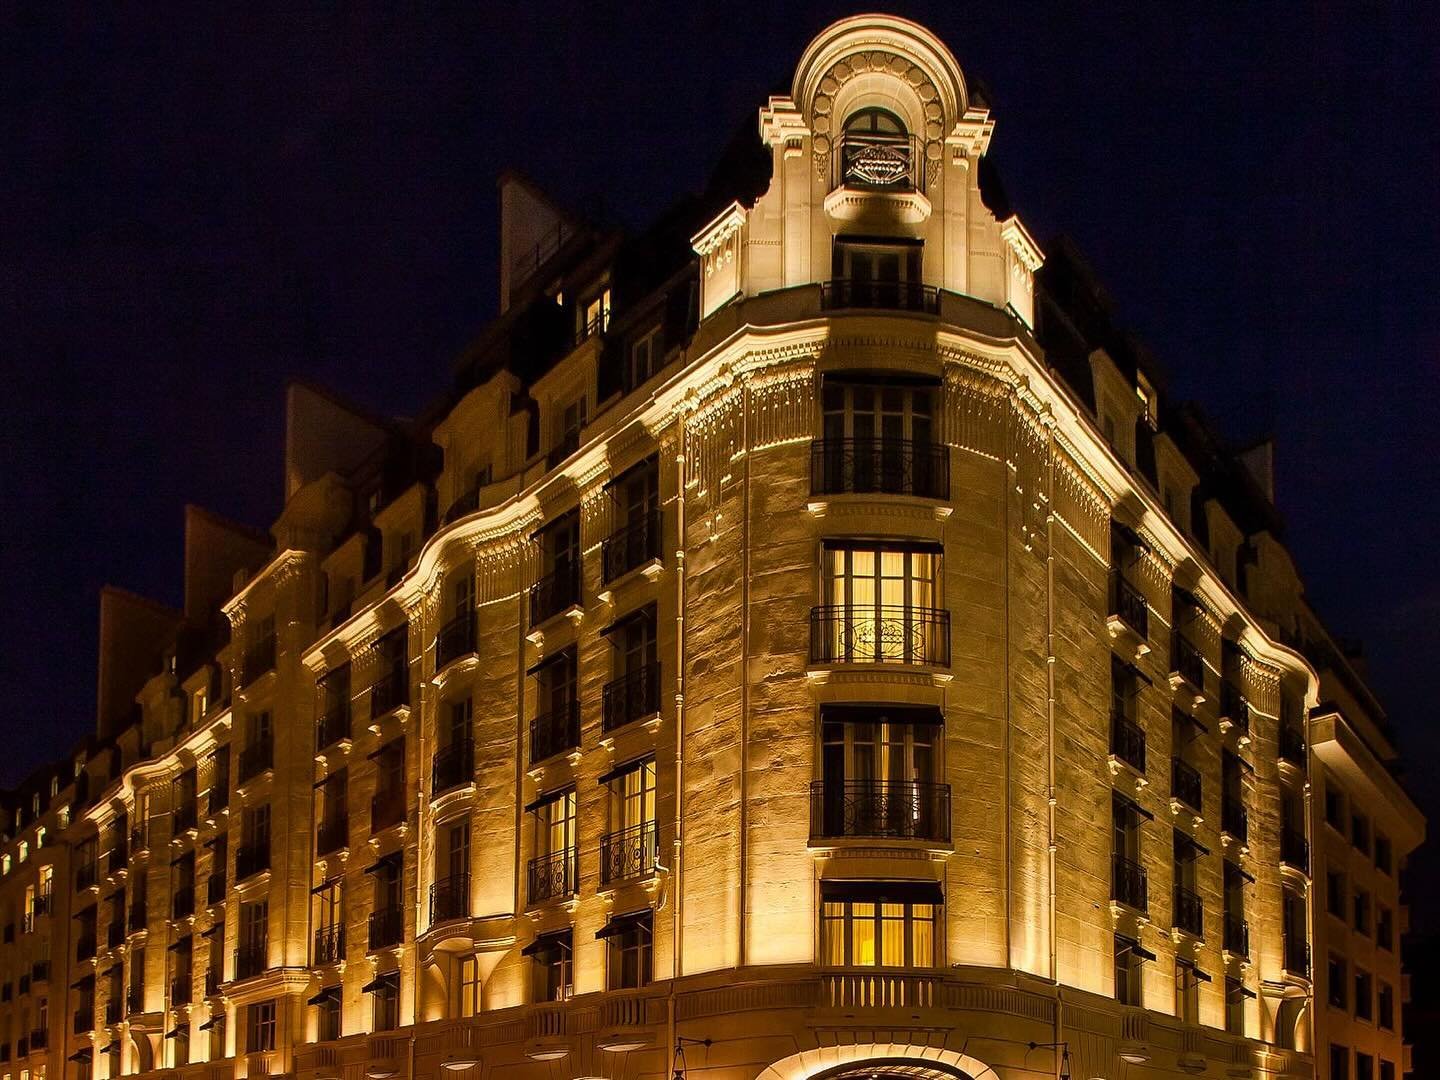 During our visit to Paris we stay at the highly recommended Sofitel Paris Arc de Triomph. See our review at www.topwithkids.com and find out about 150+ amazing family friendly destinations world-wide. 

#travel #familytime #familytrip #familyvacation